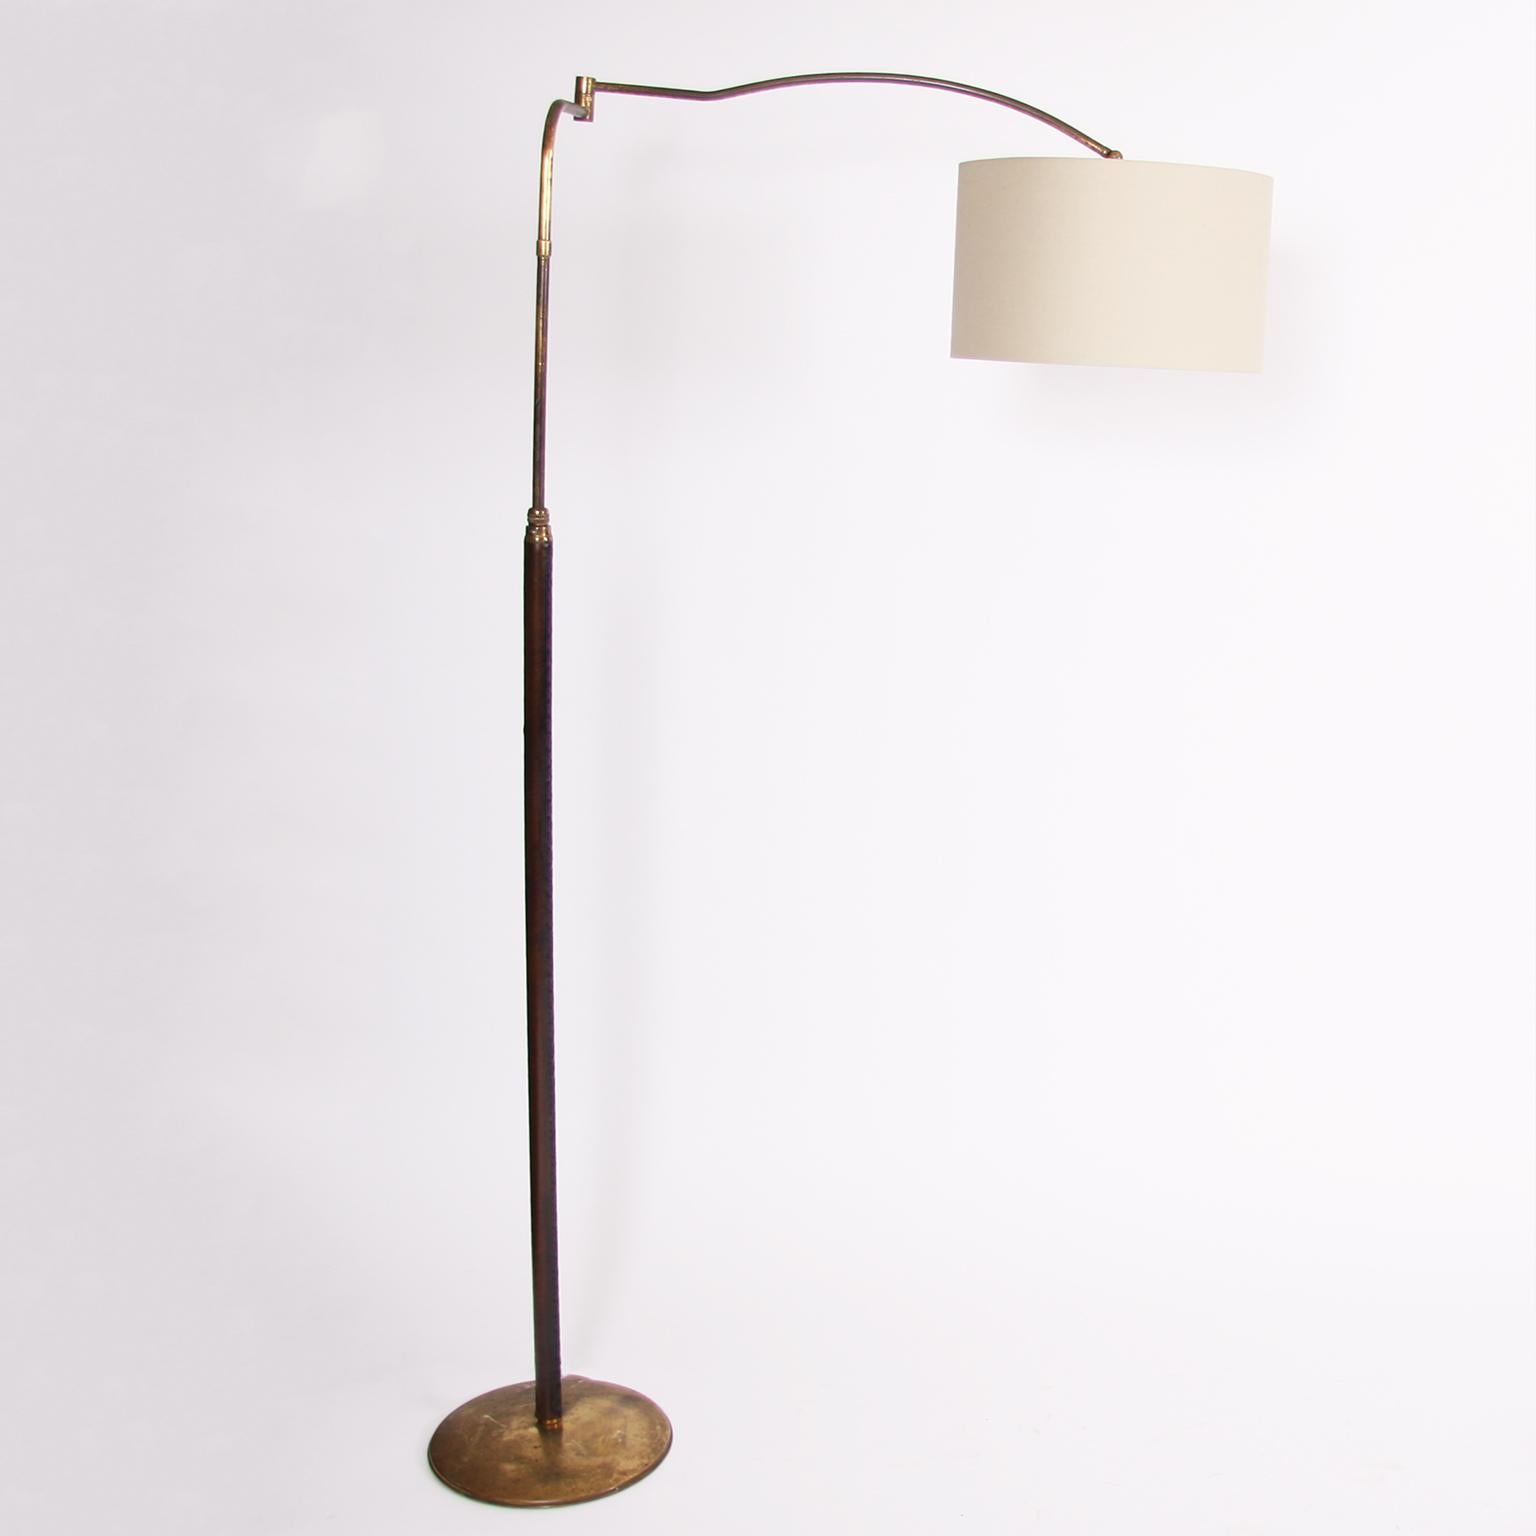 Italian, mid-20th century

A chic, tall brass floor lamp, covered in brown leather, with swing arm. Adjustable height. 

In excellent condition. 

Rewired and PAT tested.